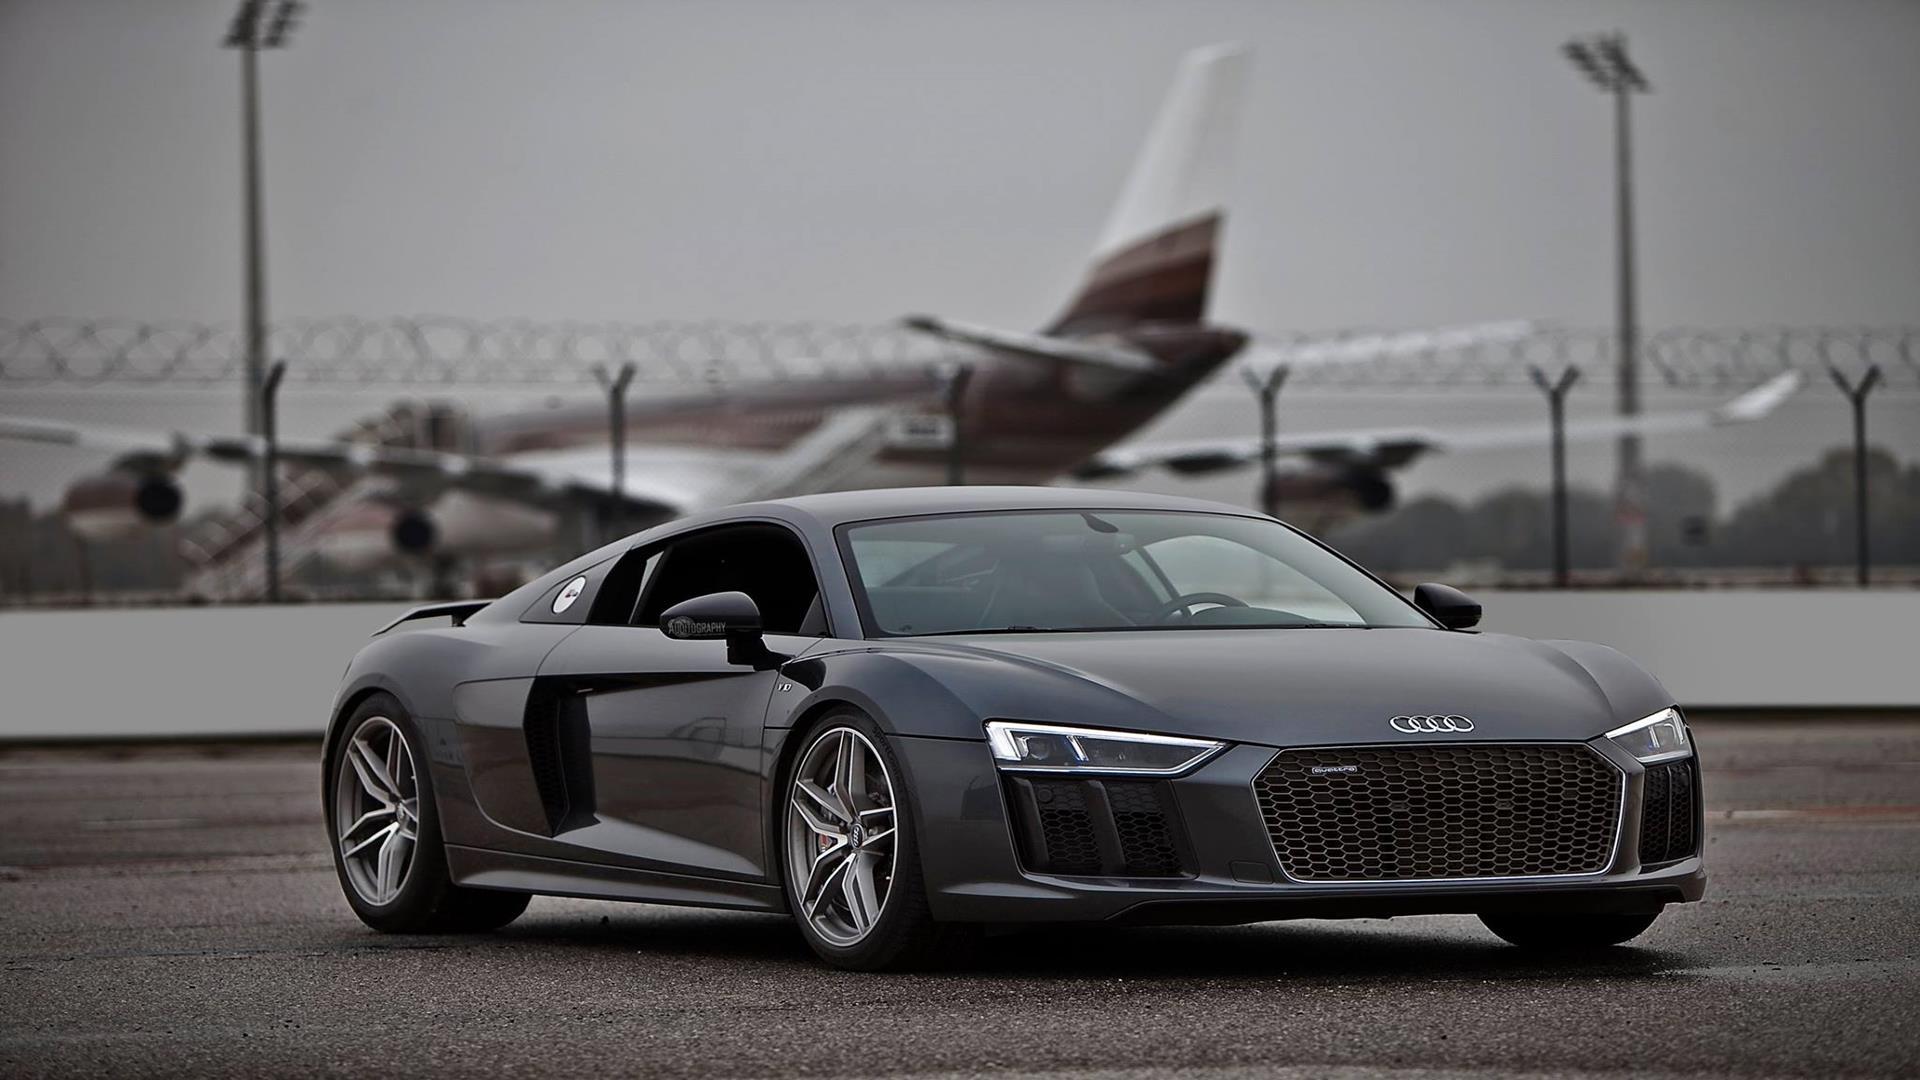 You Can Download 2016 Audi R8 V10 Plus Fullhd Wallpapers